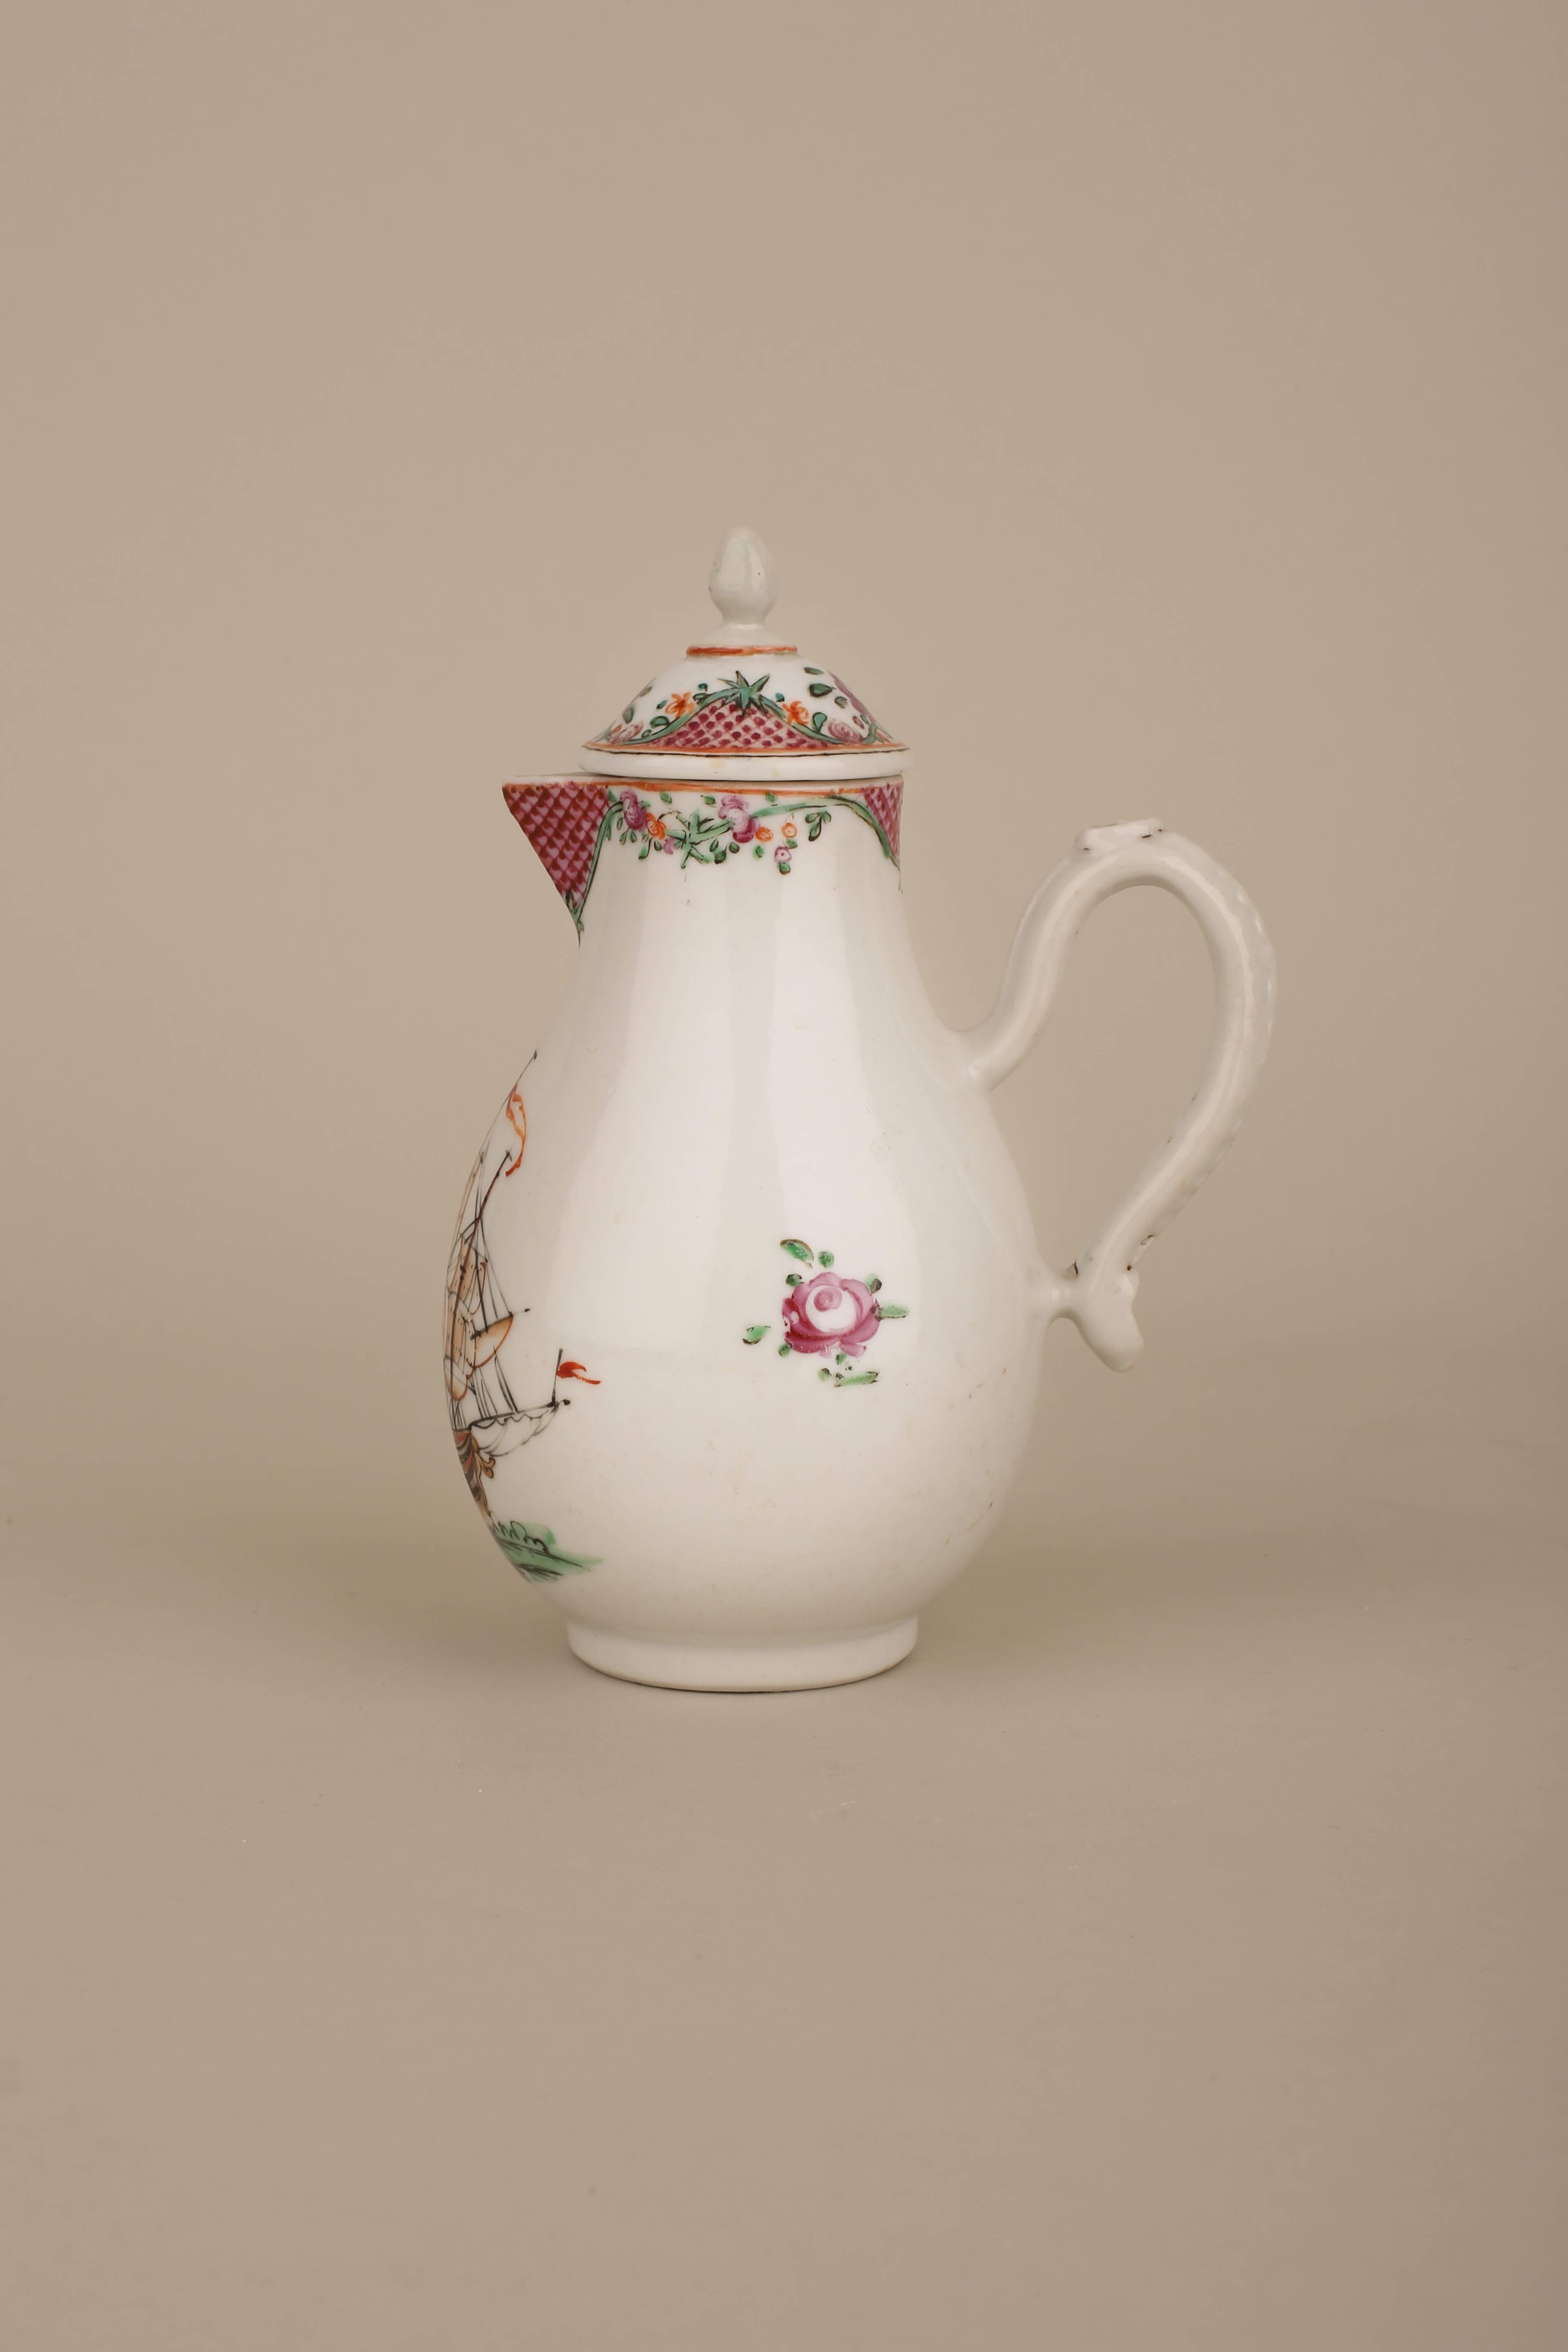 Painted Chinese Porcelain Famille Rose Cream Jug, English Sailing Ship, 18th Century For Sale